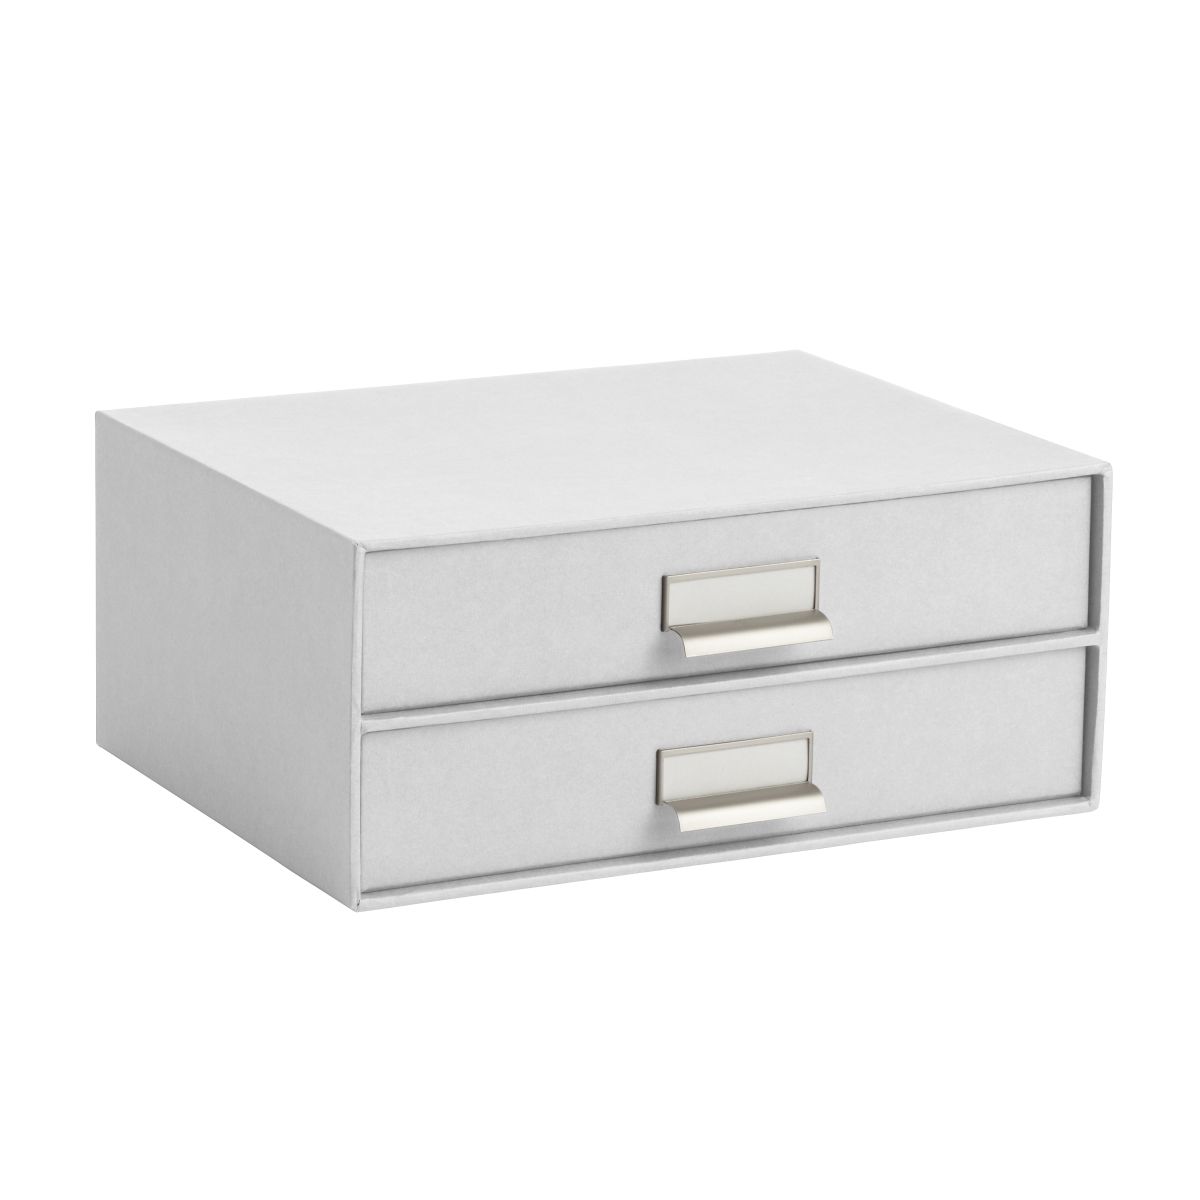 Bigso Stockholm Paper Drawers Grey | The Container Store